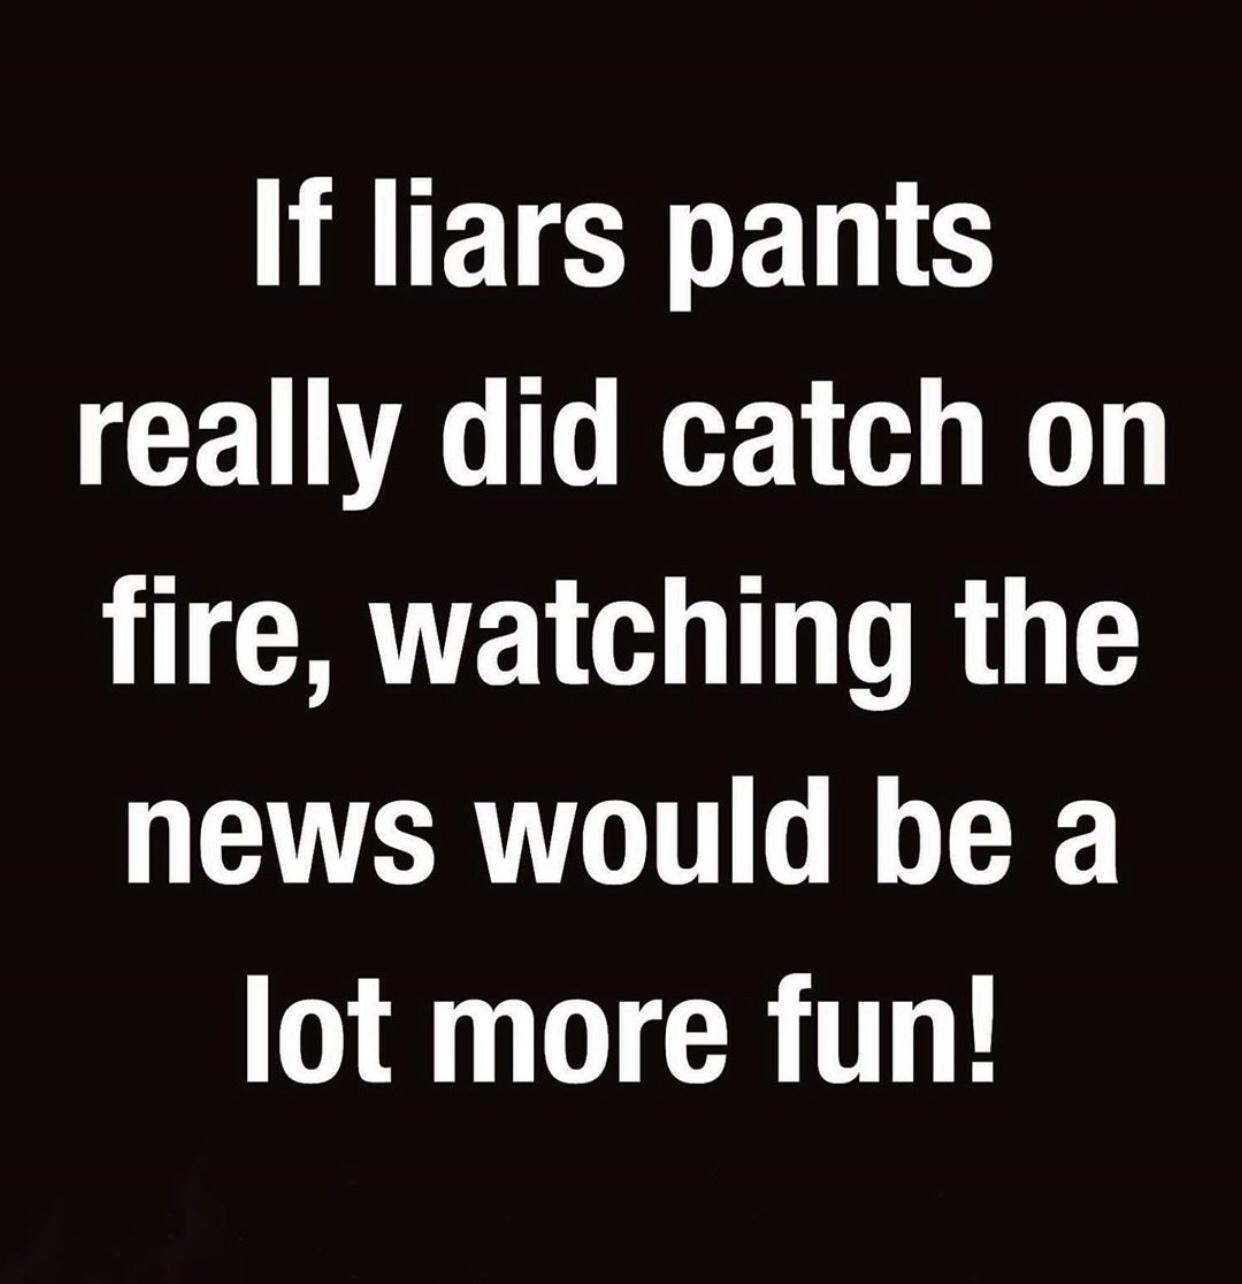 can t wait forever - If liars pants really did catch on fire, watching the news would be a lot more fun!